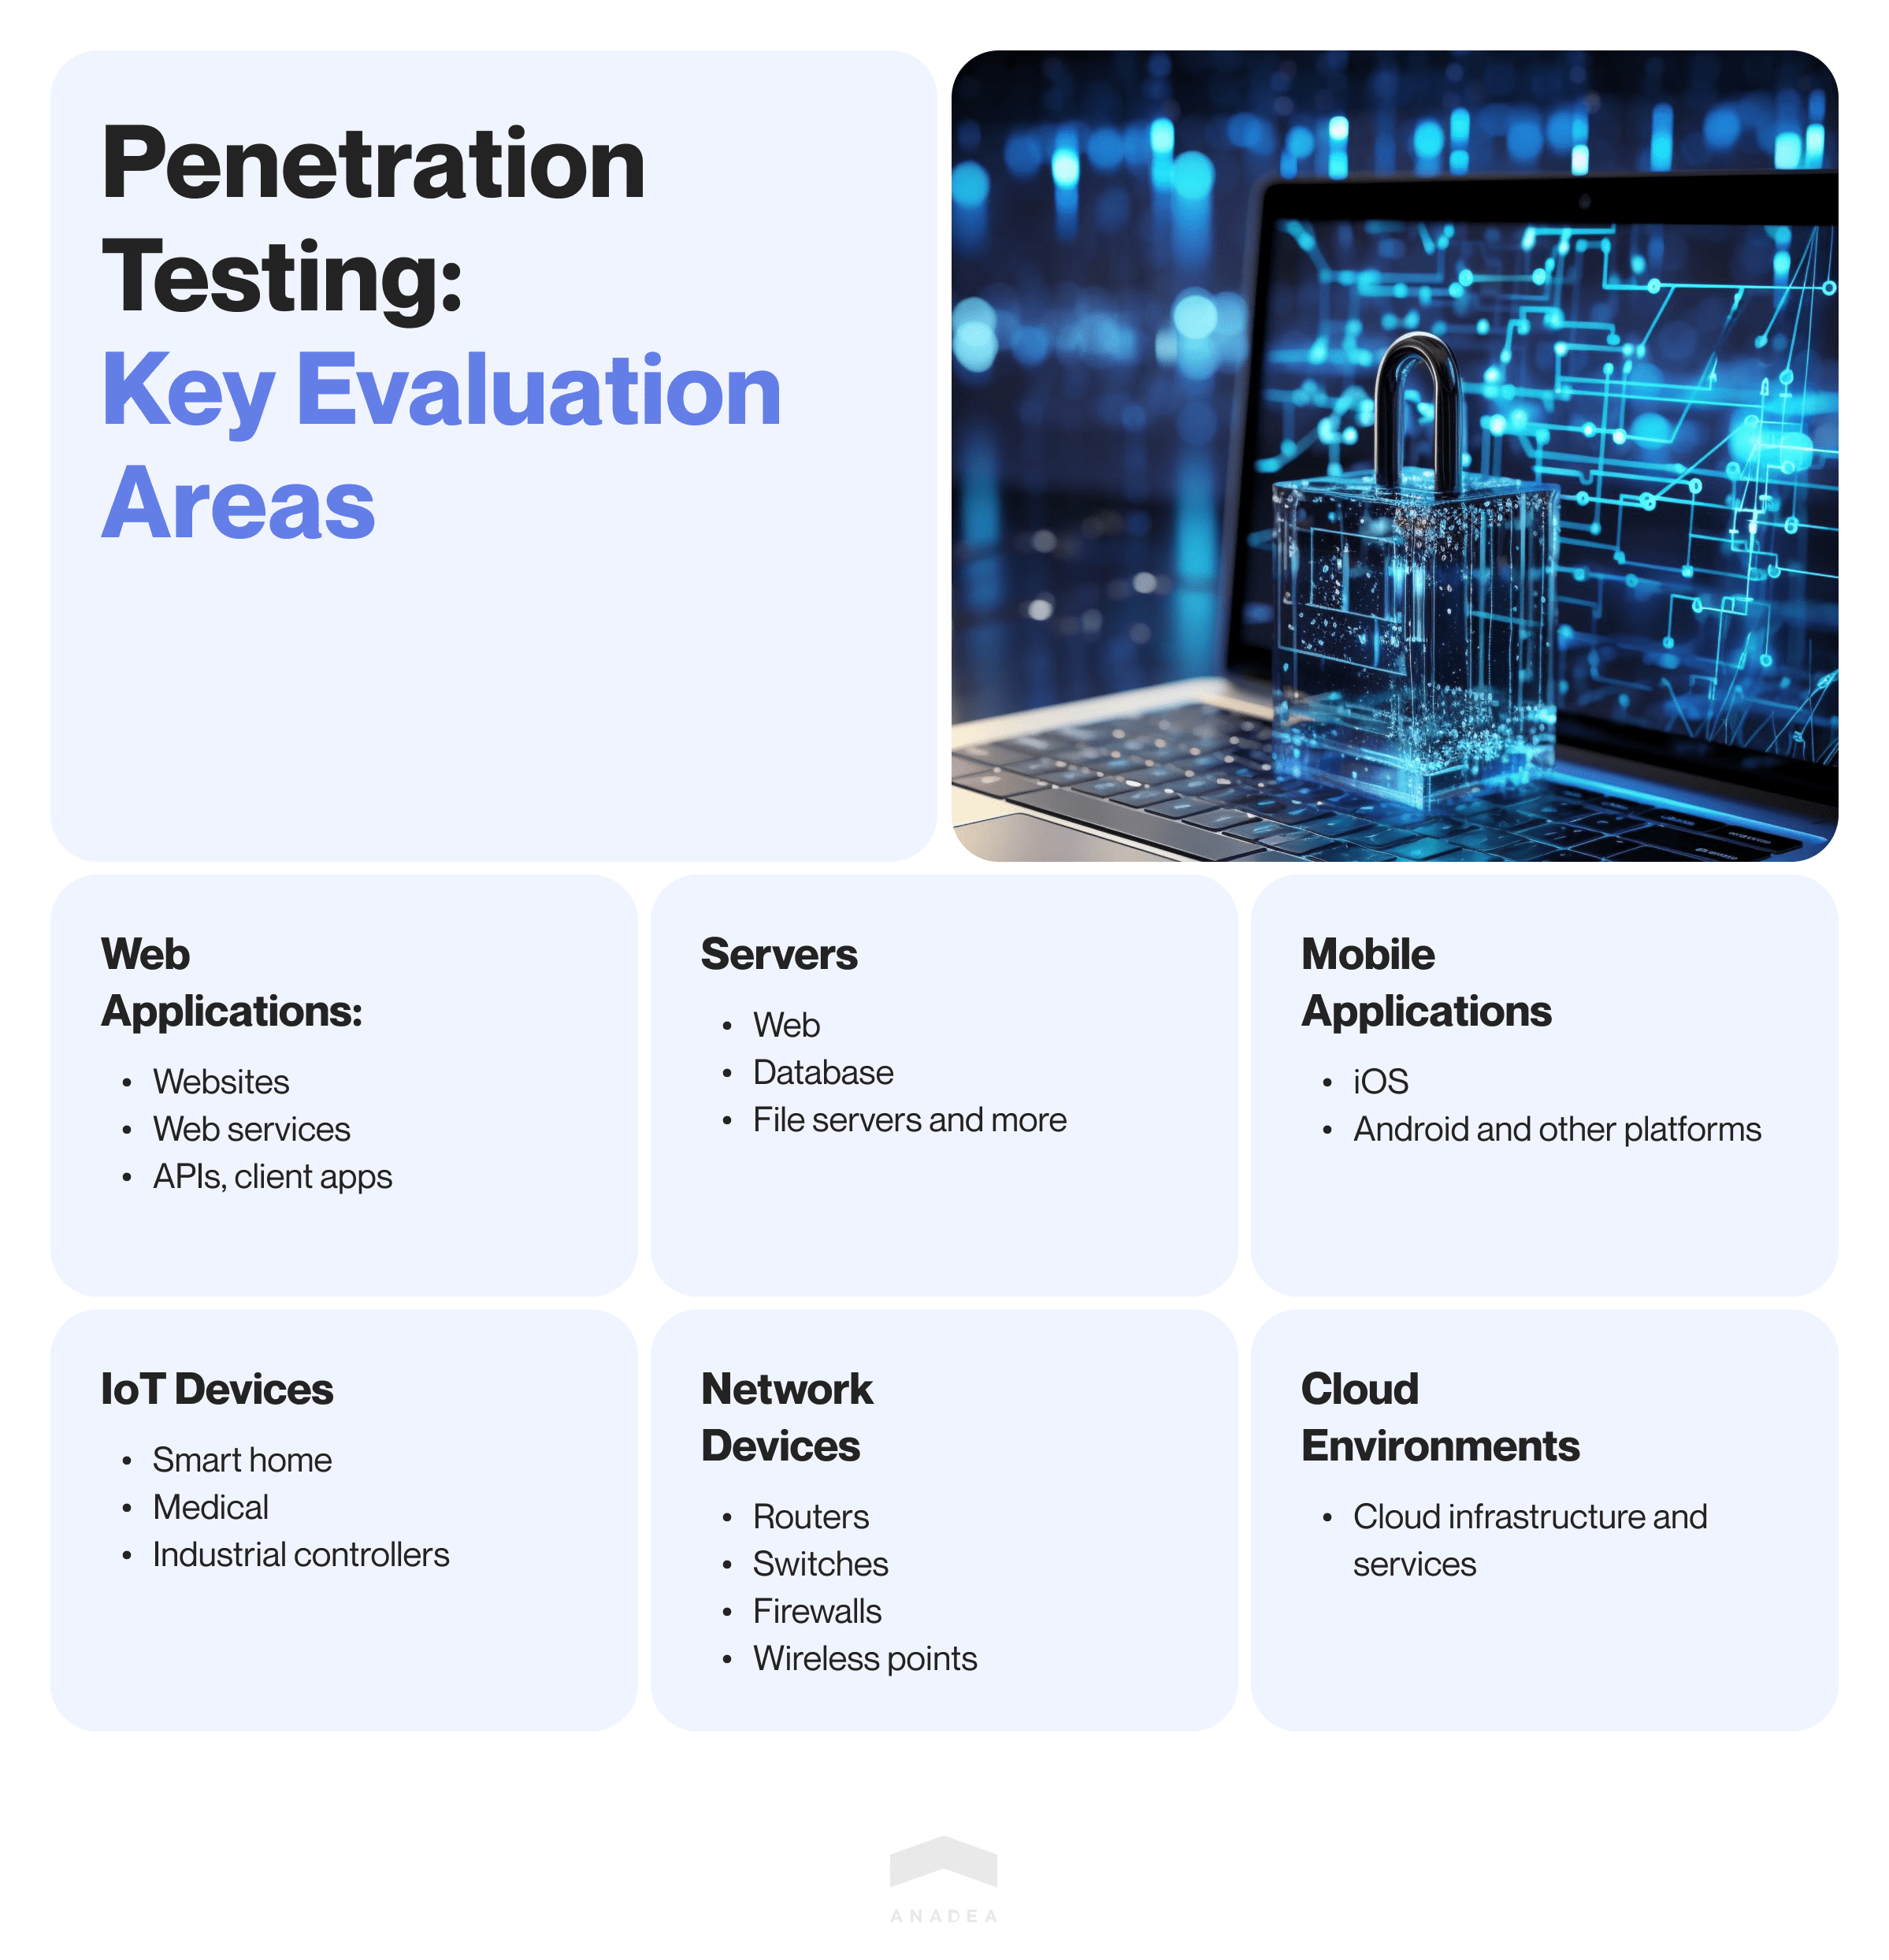 What can be evaluated by penetration testing